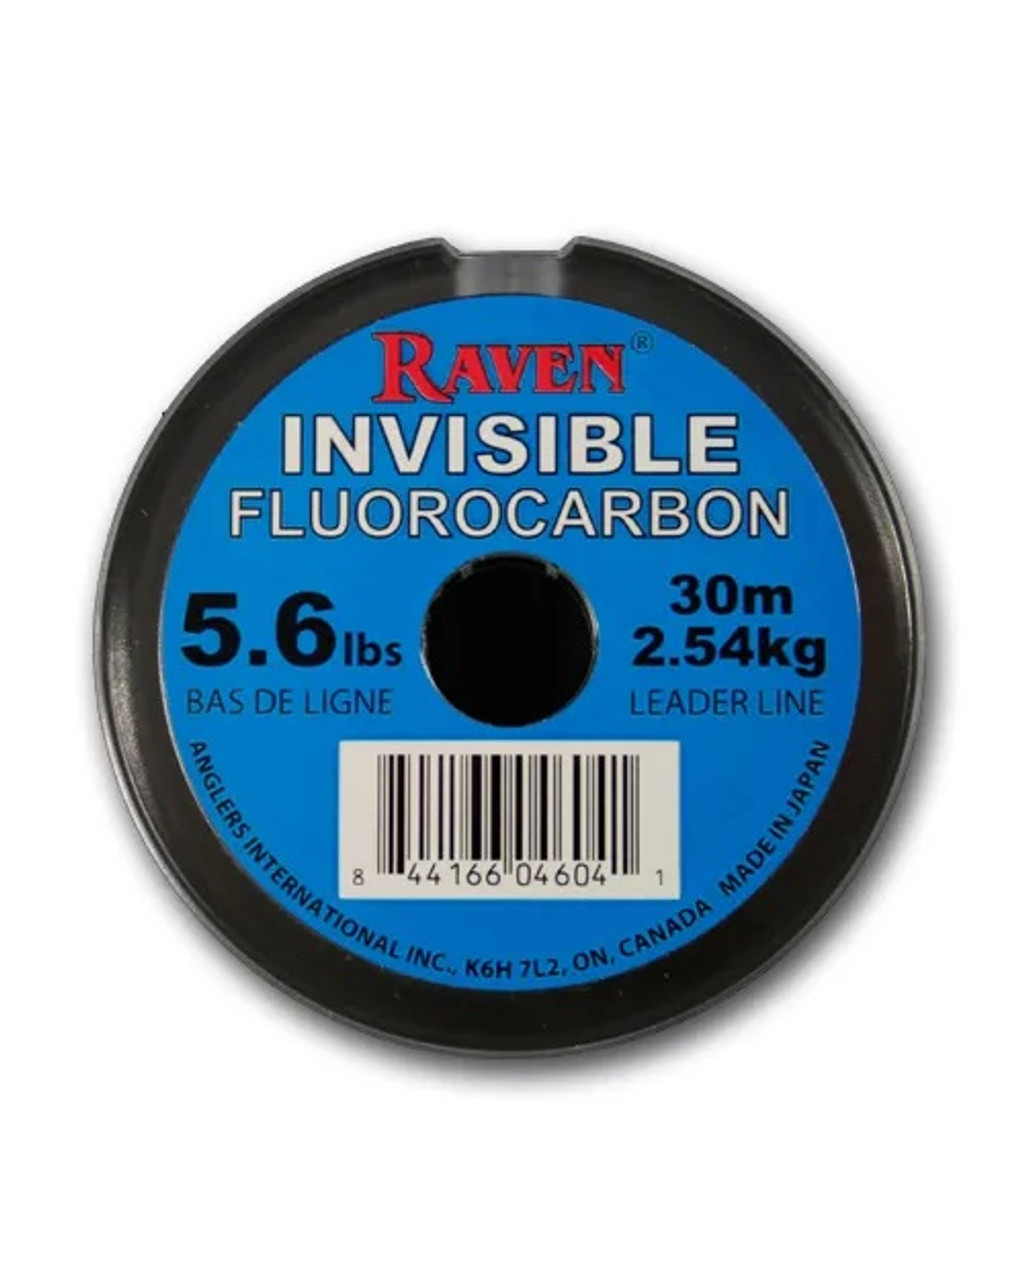 Can this be used as leader line like regular fluorocarbon, or does